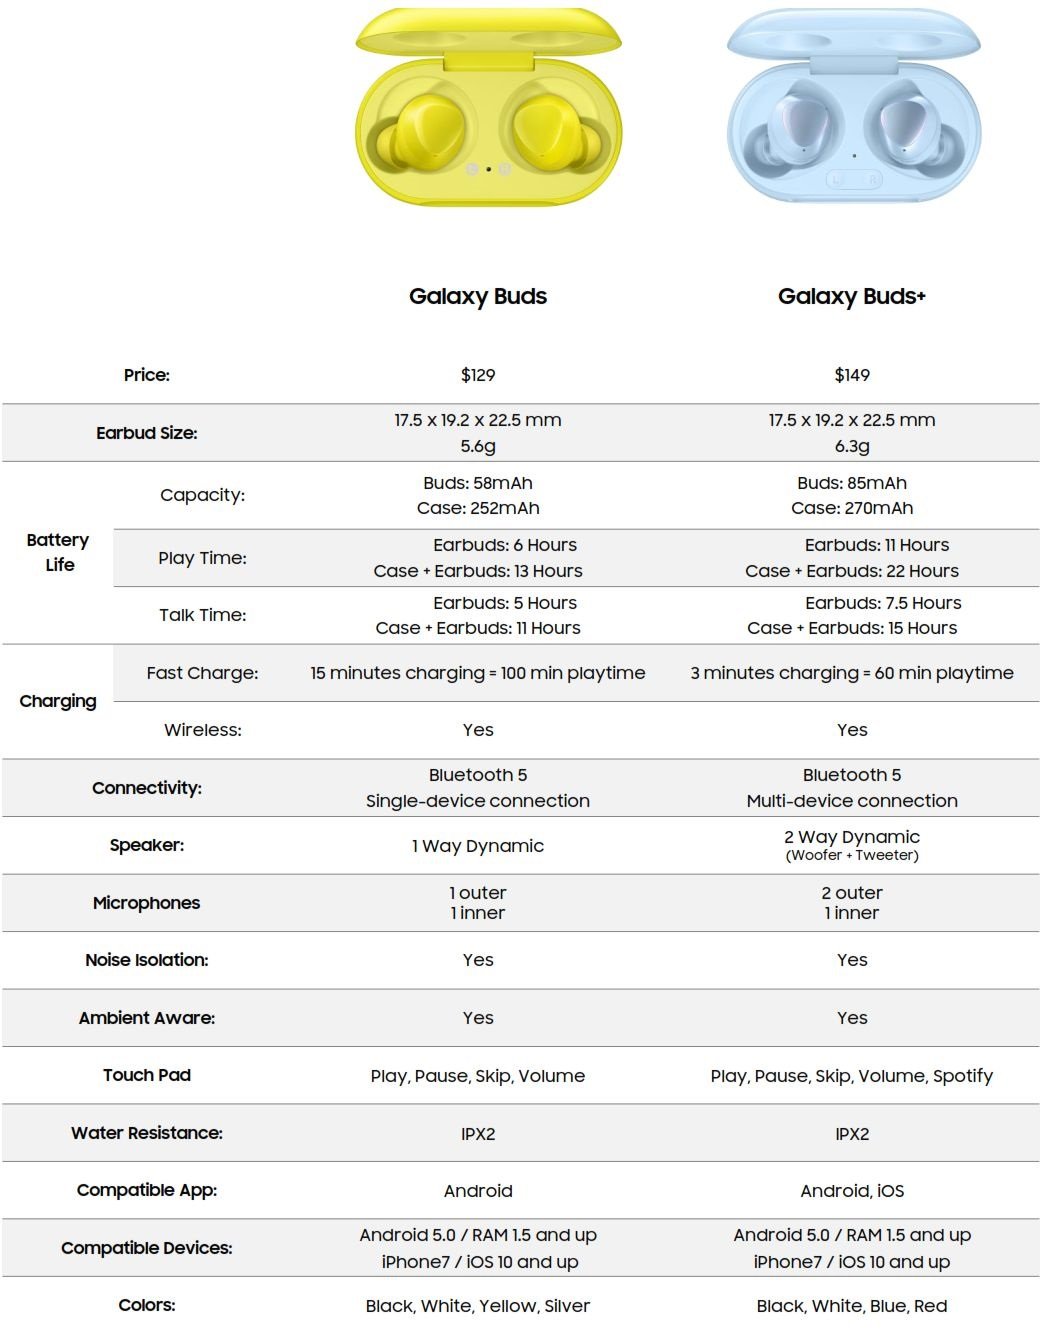 Comparison between Galaxy Buds and Buds+